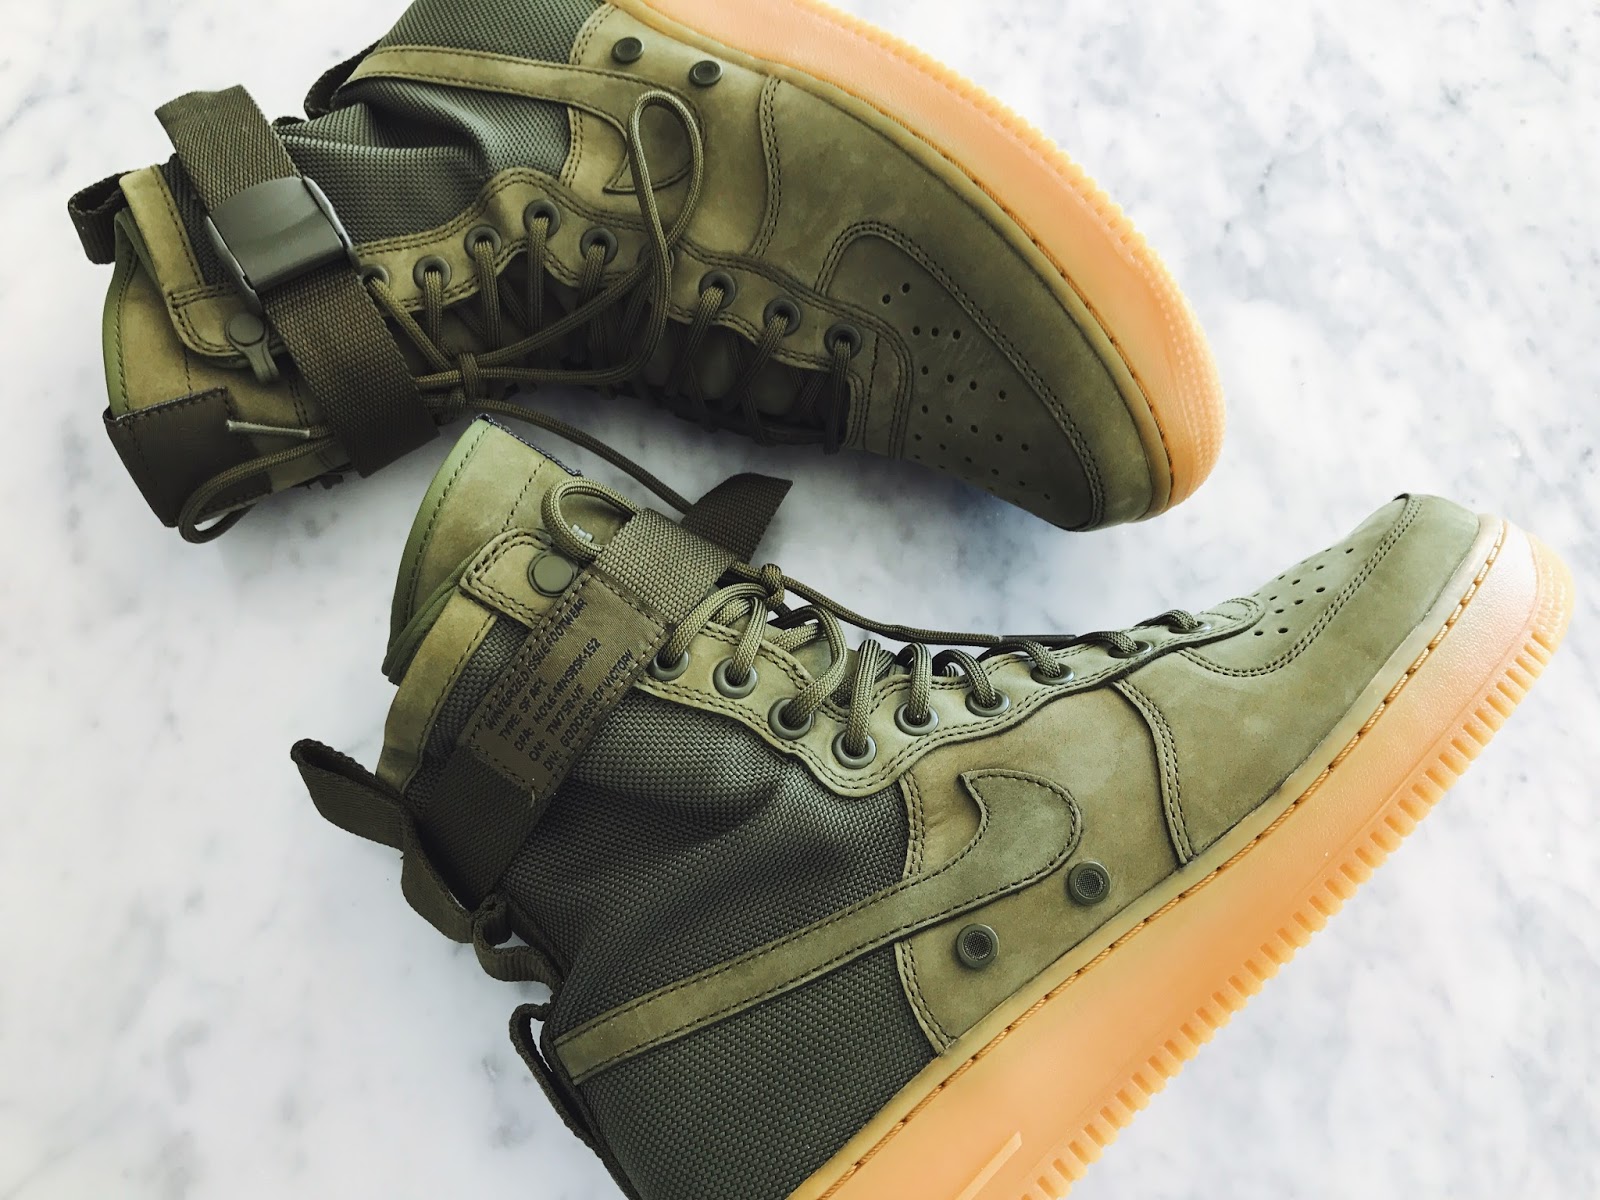 nike special field air force 1 green